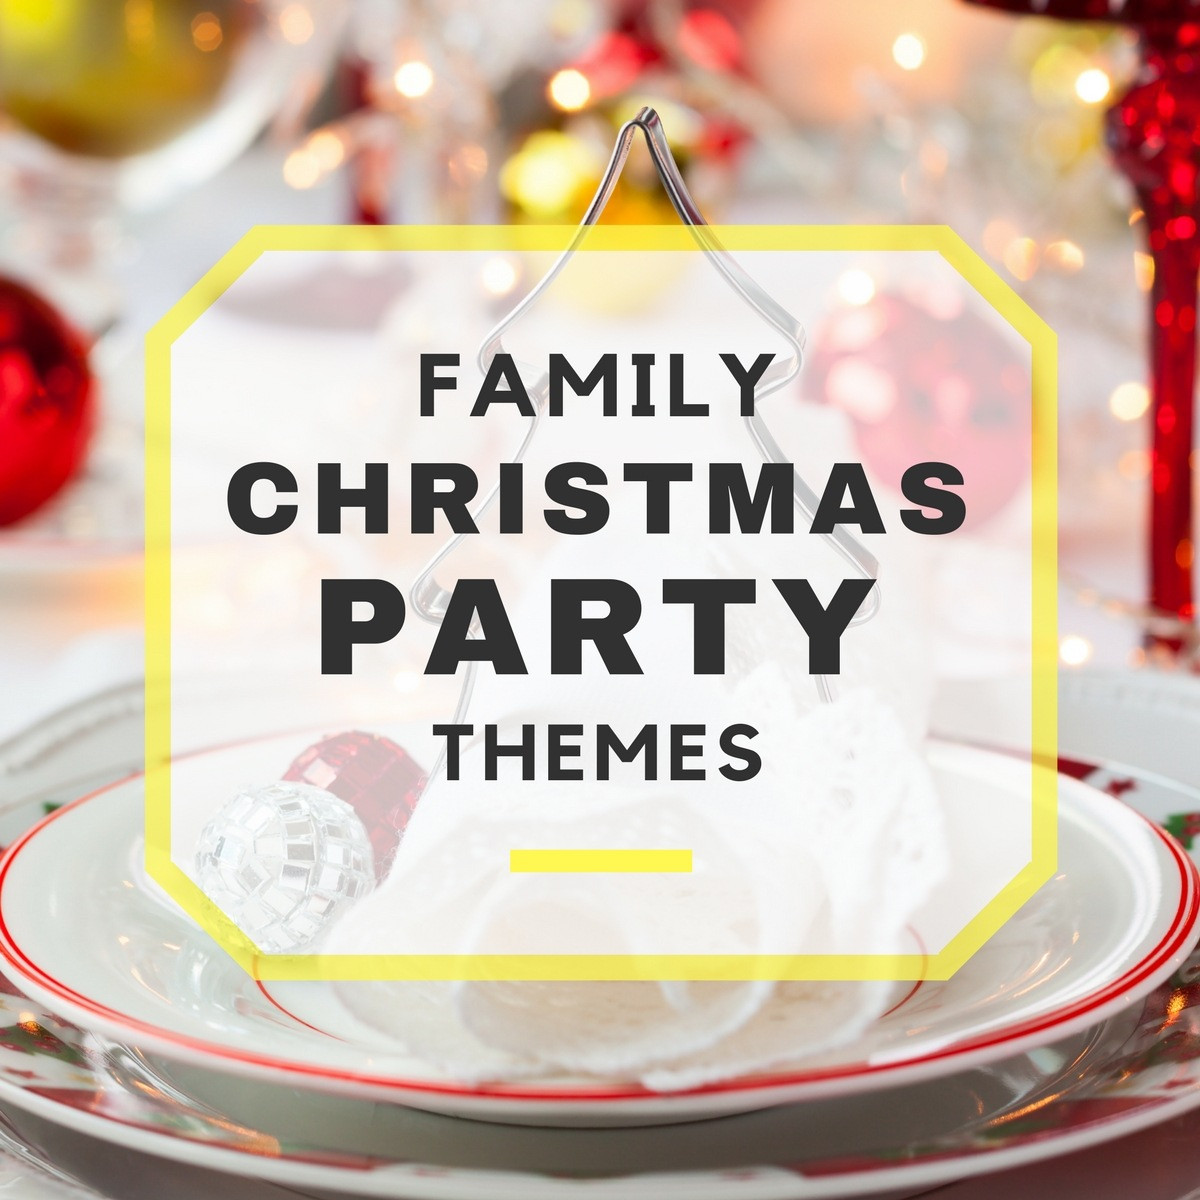 After Christmas Party Ideas
 Family Christmas Party Themes